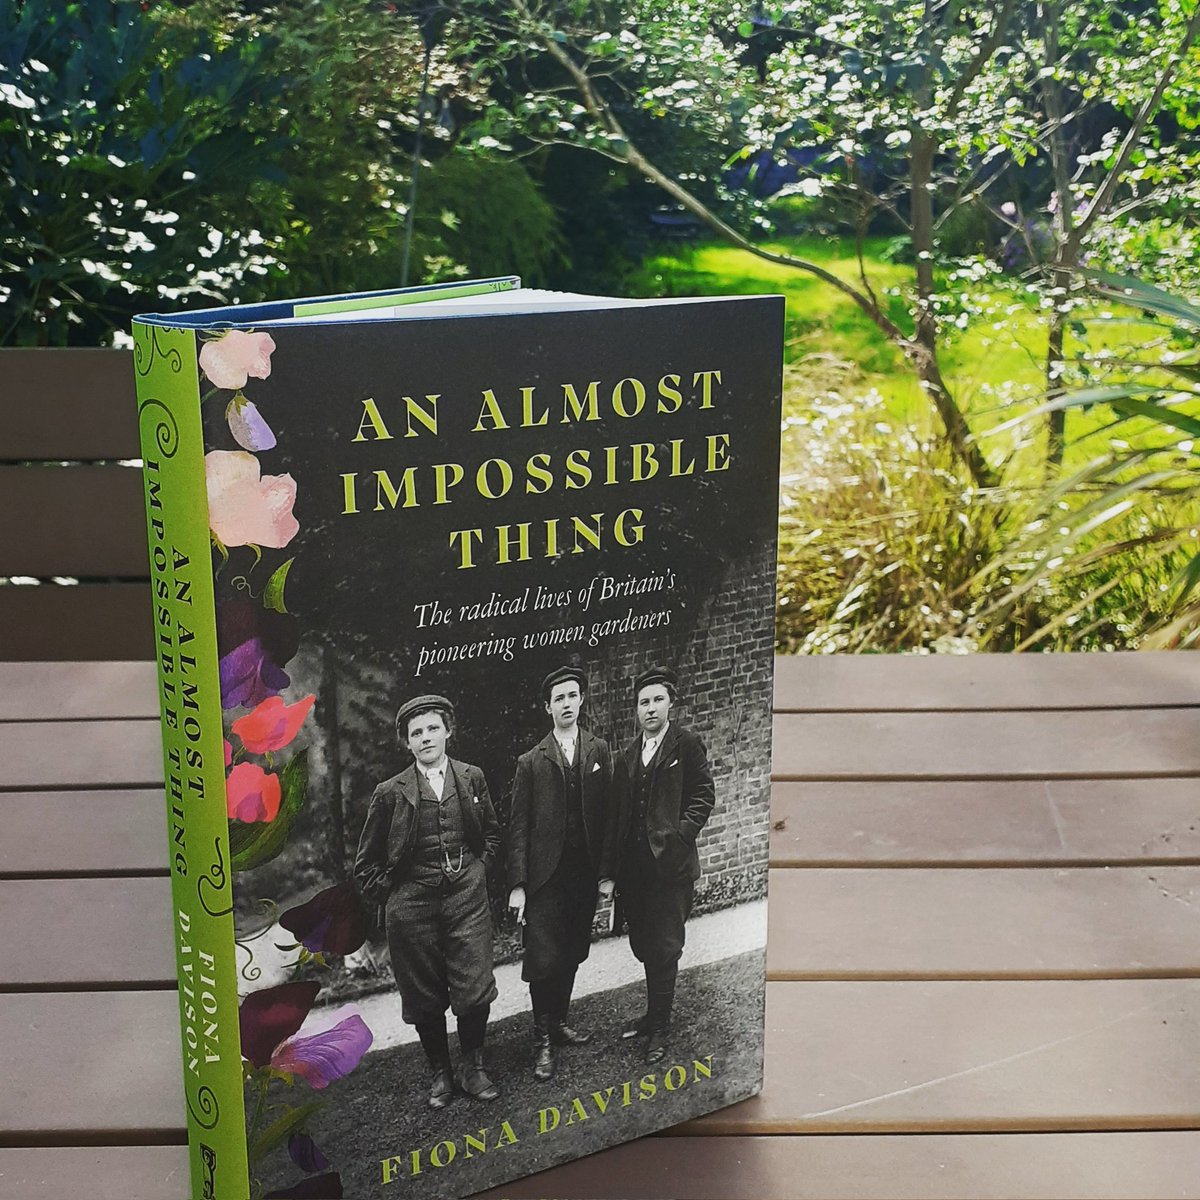 The Almost Impossible book tour gathers pace! If you are at the @RHSWisley Flower Show this Thursday I am speaking about my book in The Garden Room - come rest your feet and hear about inspirational gardening women